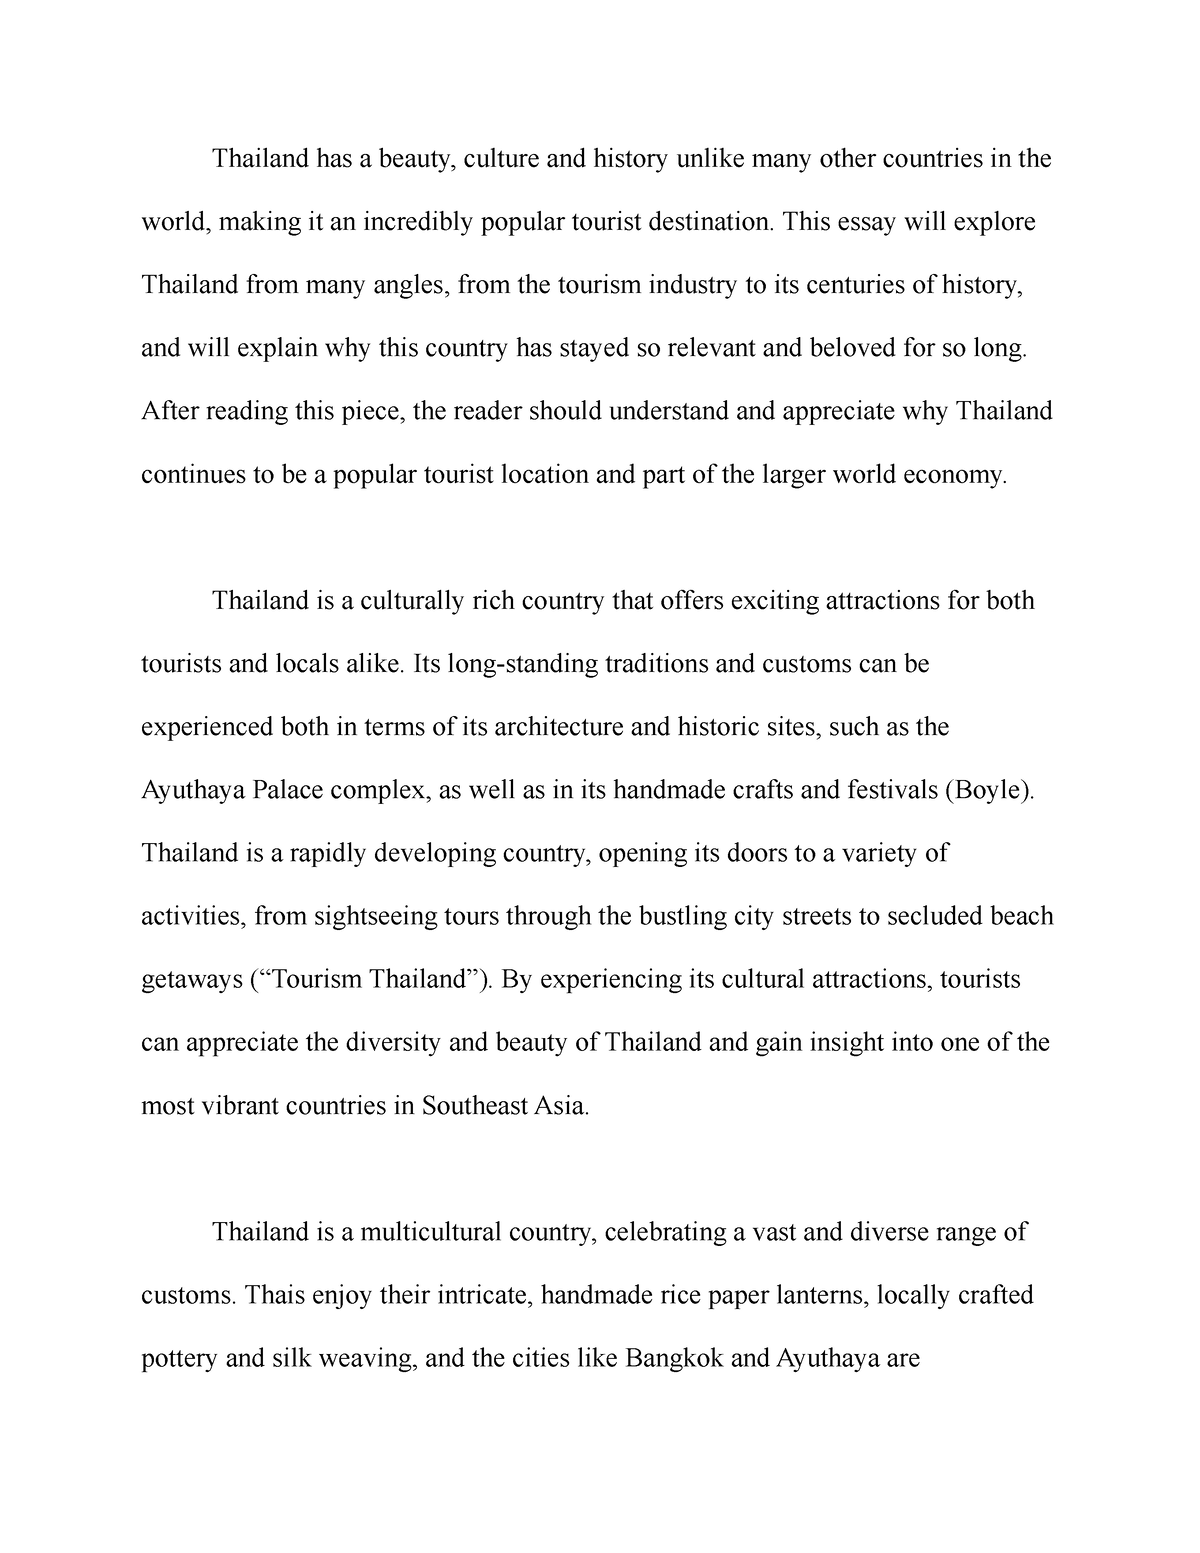 introduction to thailand essay